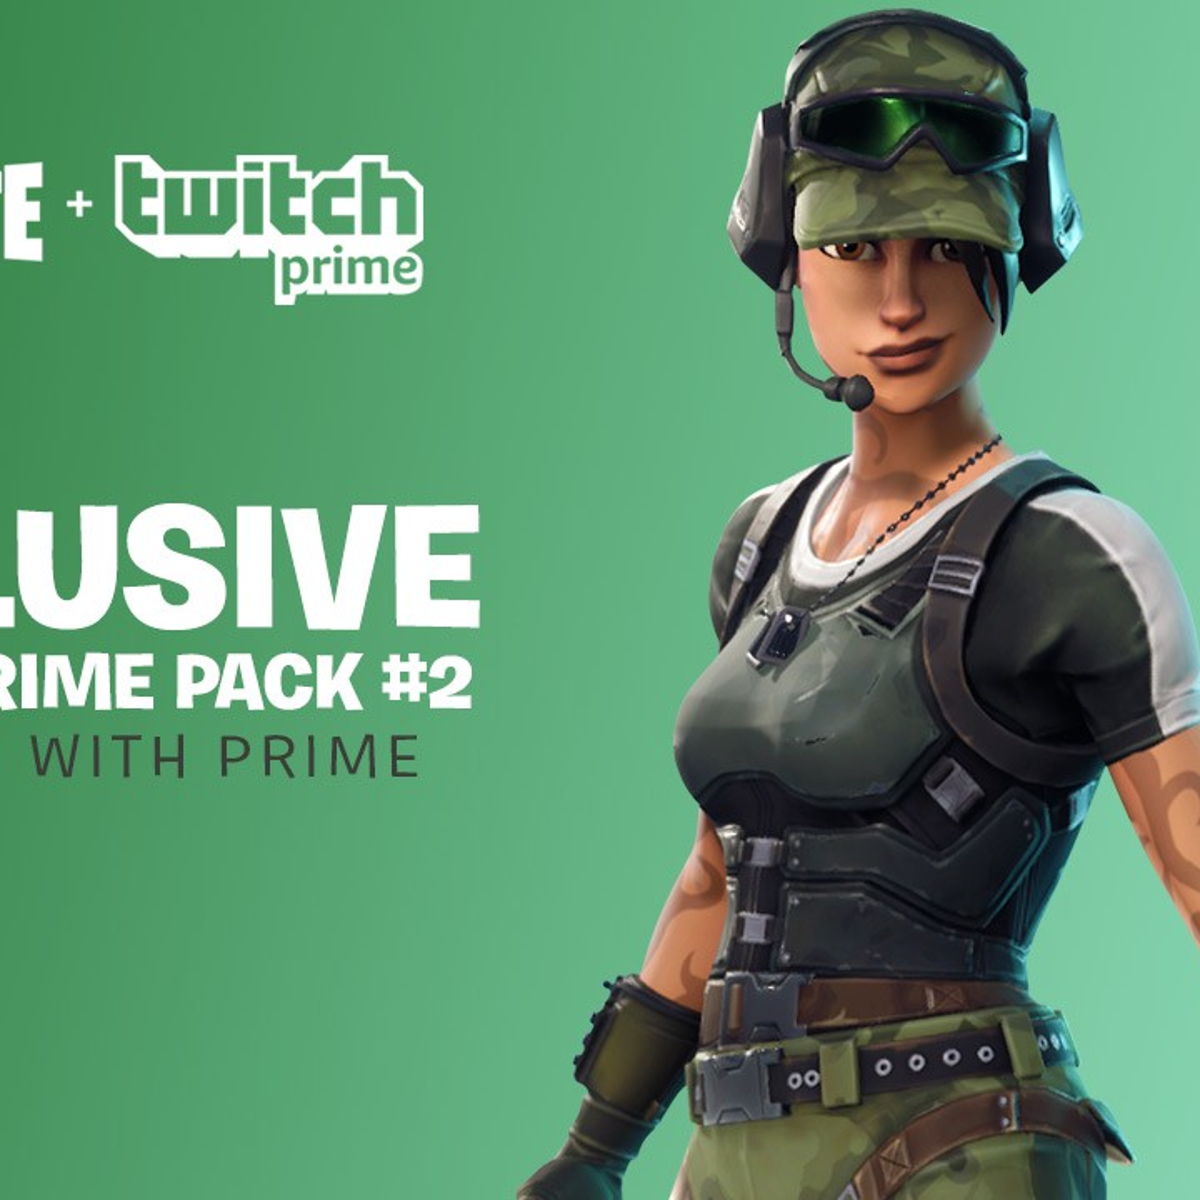 Twitch Prime subscribers get another batch of free Fortnite loot